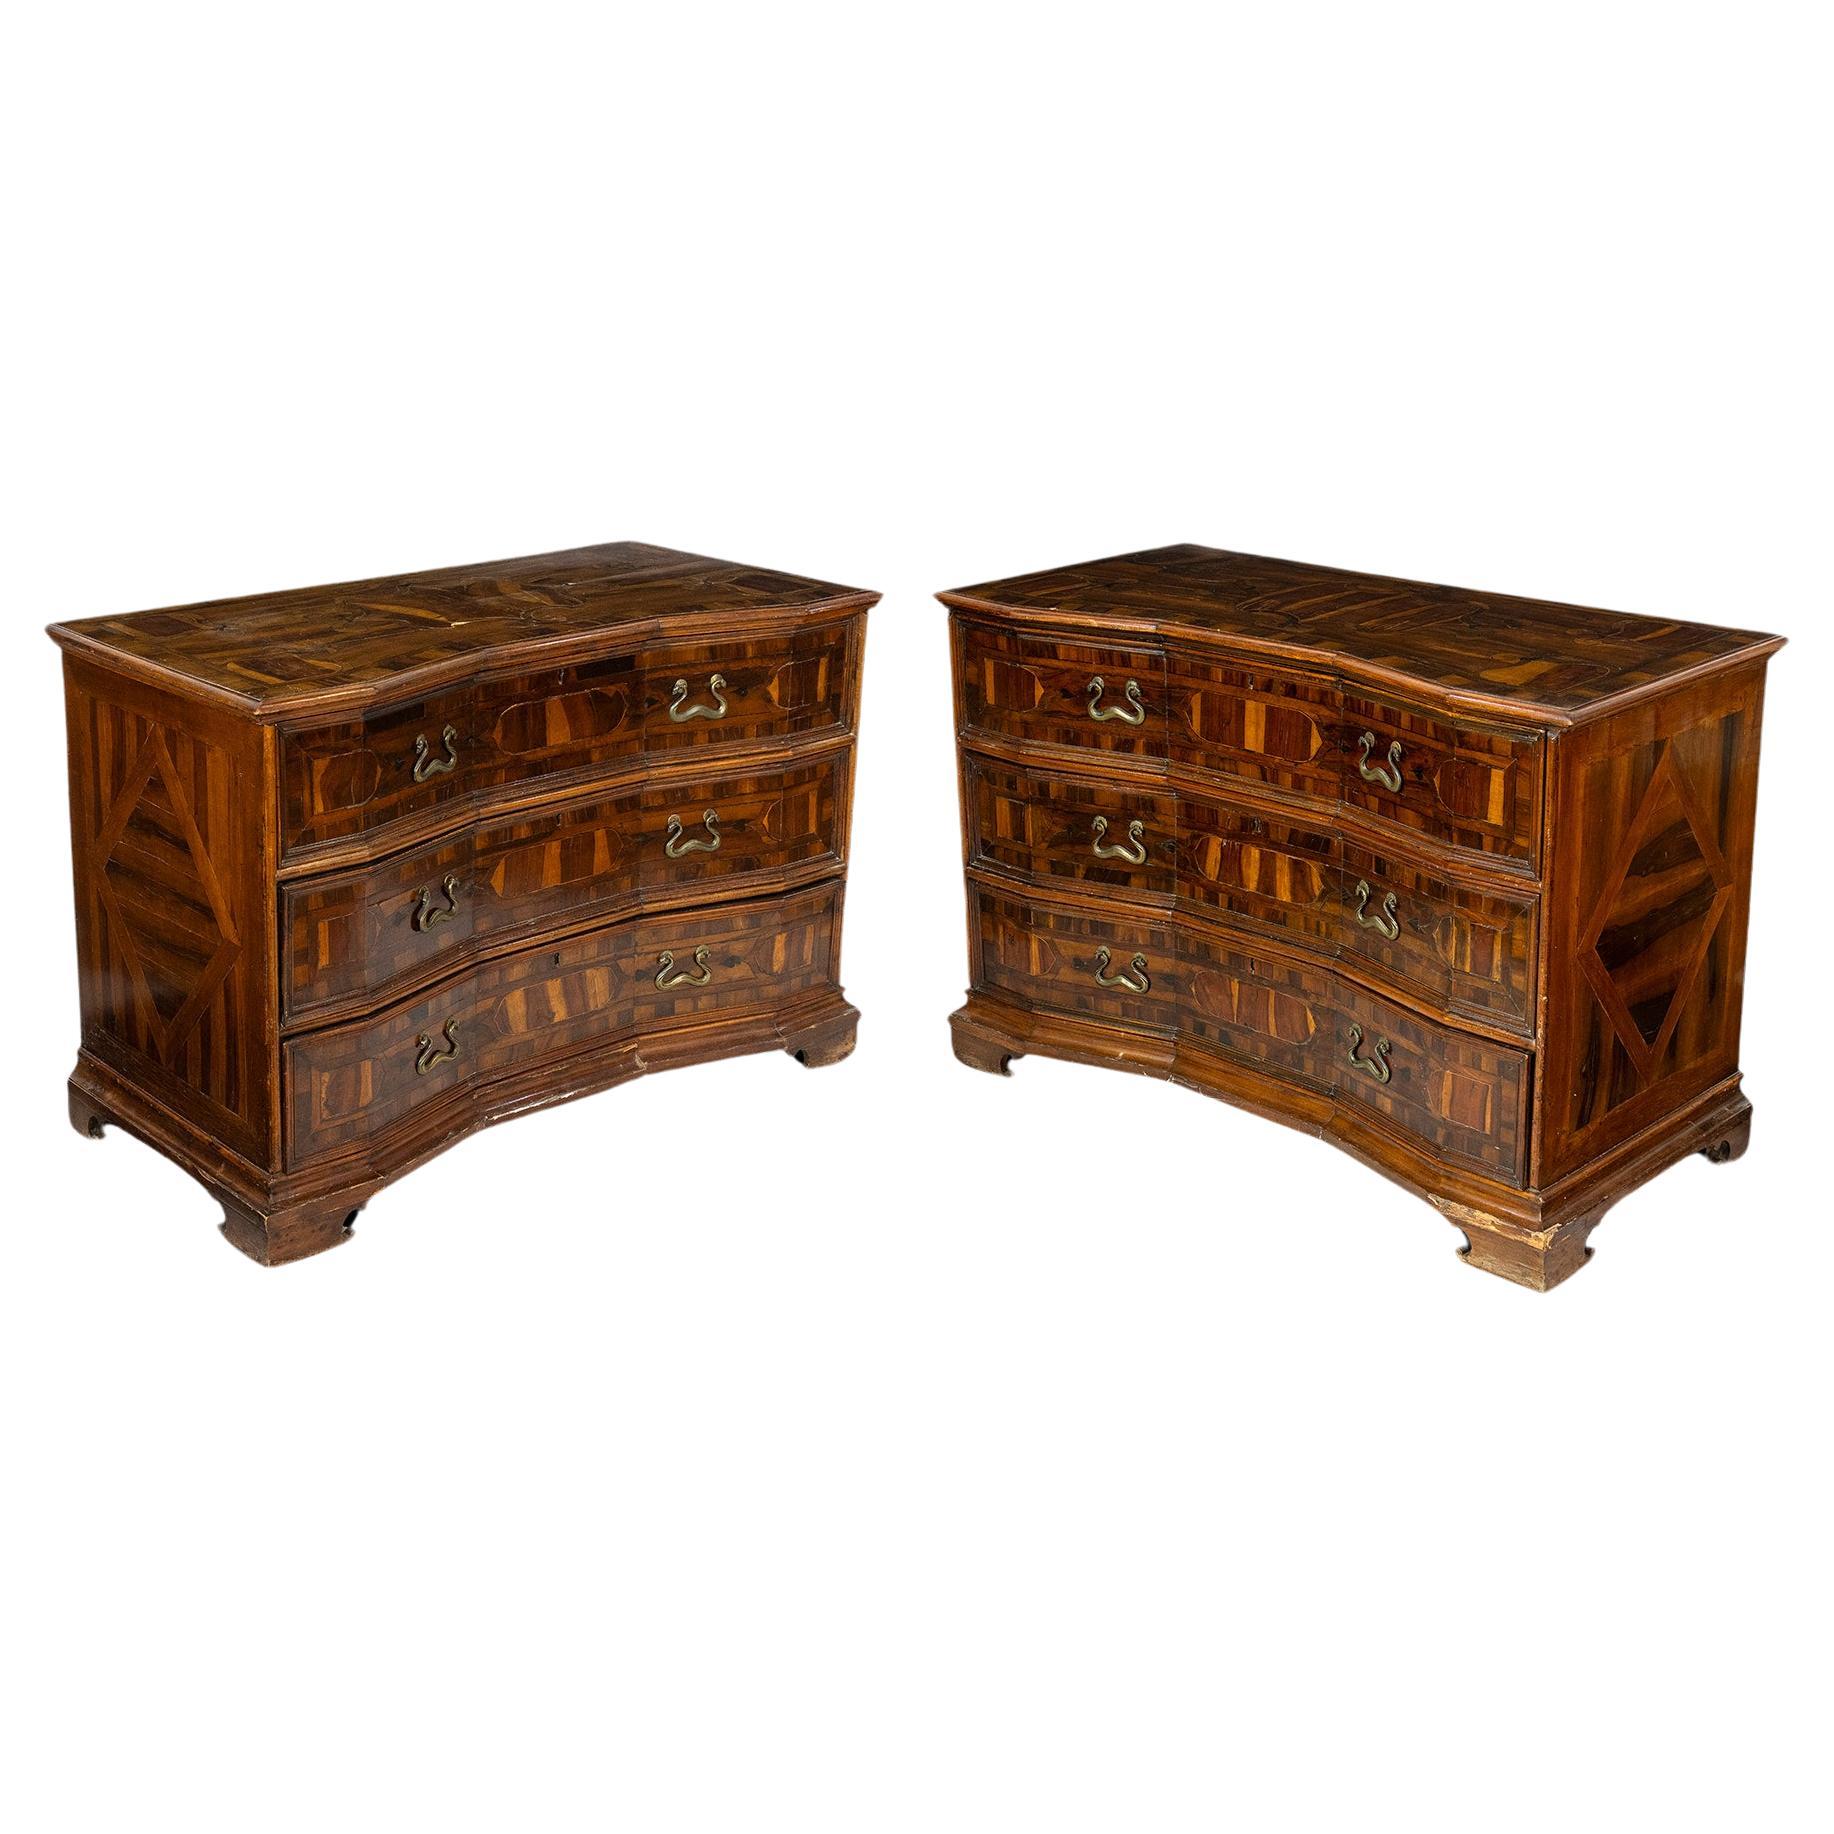 Late 17th Century Commodes and Chests of Drawers